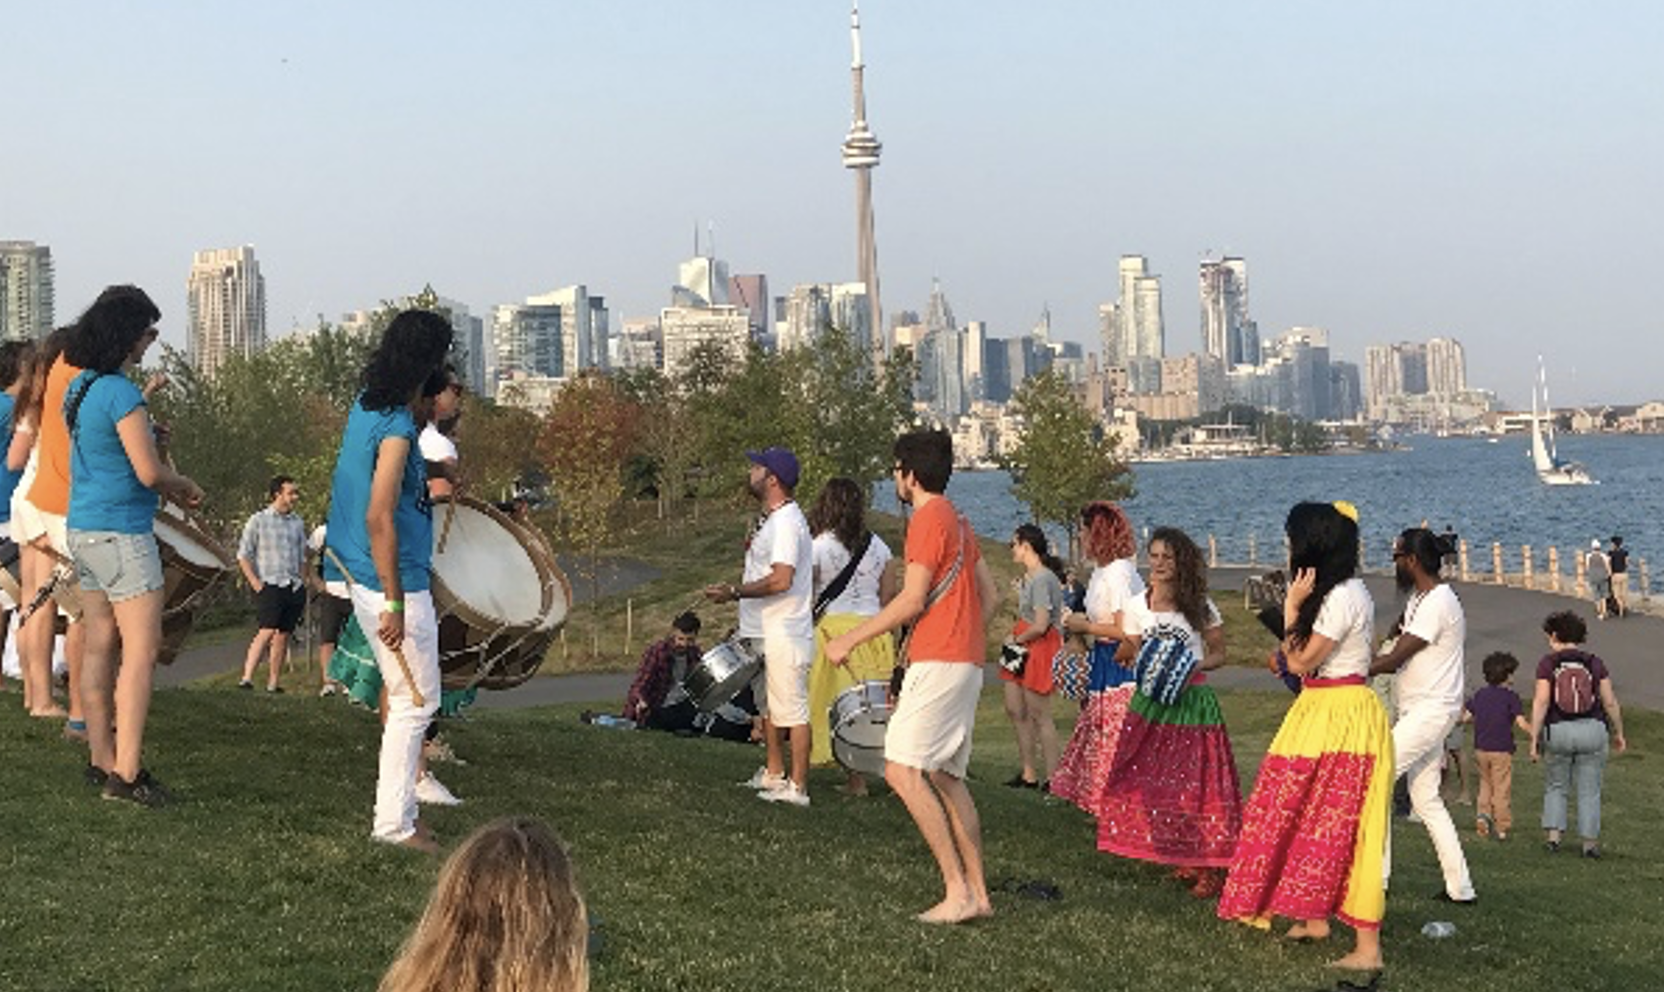 A group of people standing or dancing on a grassy hill with a body of water and a city skyline in the background 